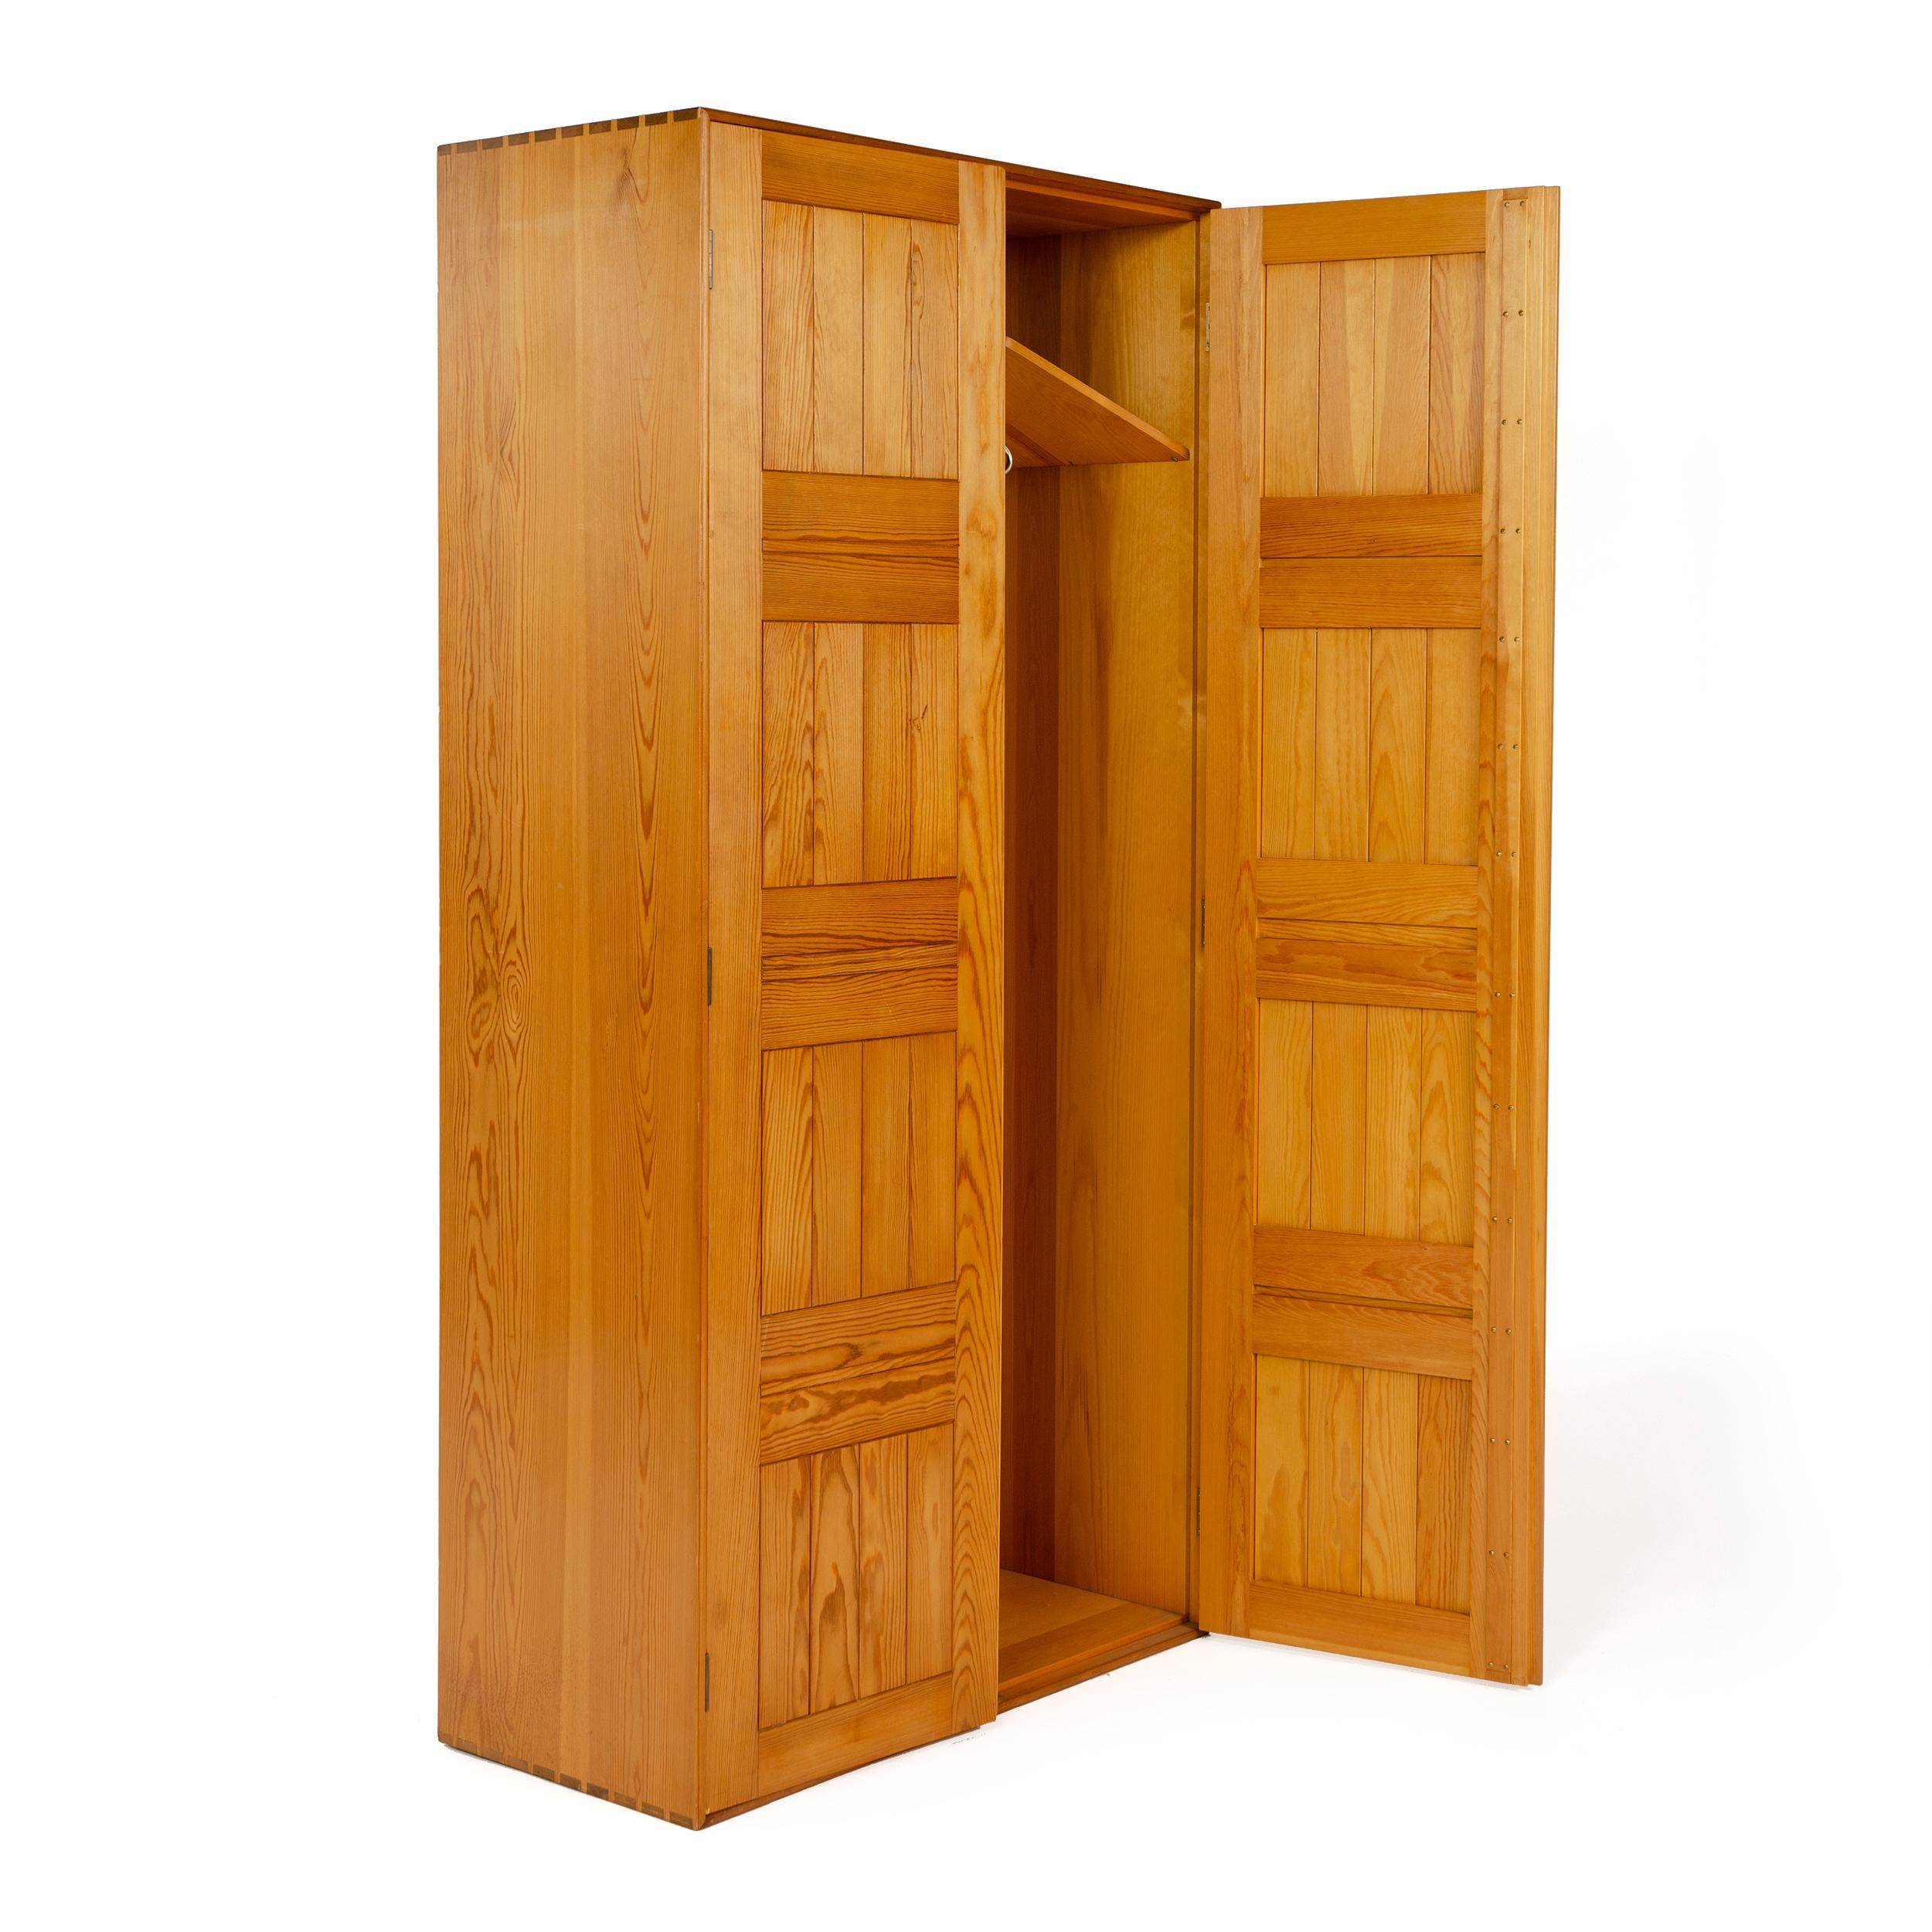 A two-door solid pine wardrobe with a dovetailed case and sliding brass hanger rod.